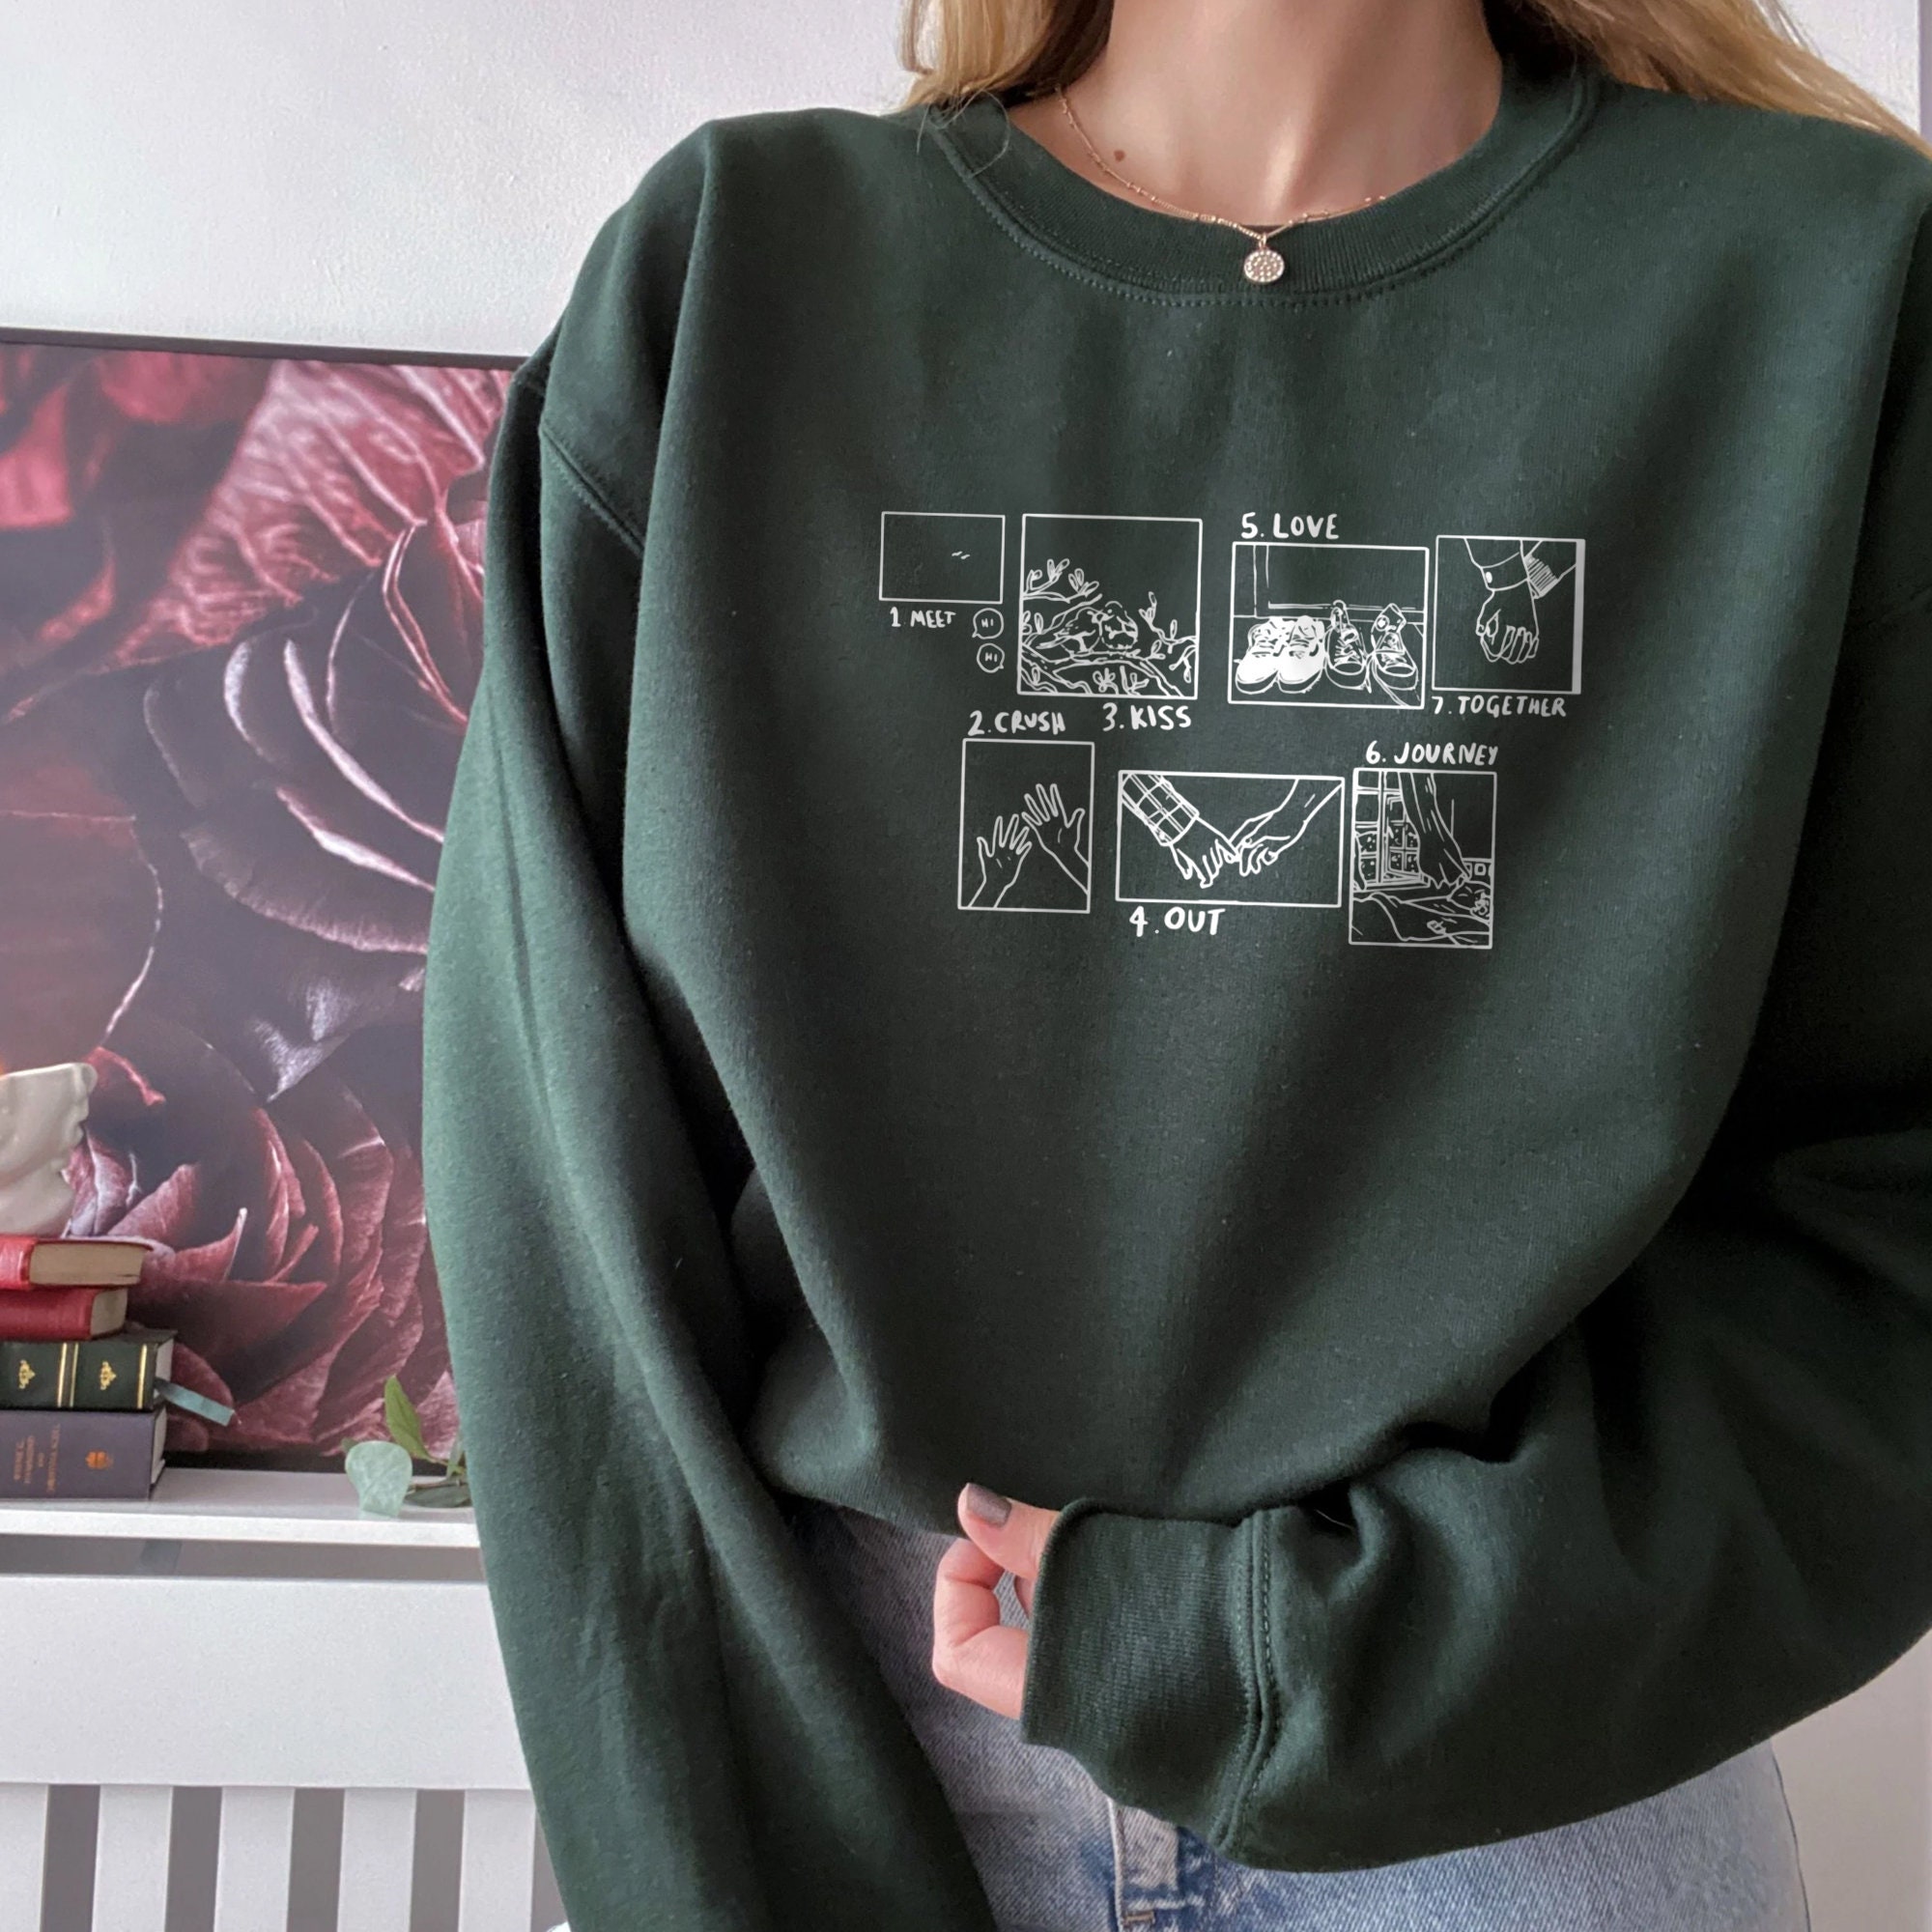 Heartstopper Phases Inspired Book Nick And Charlie Unisex Sweatshirt